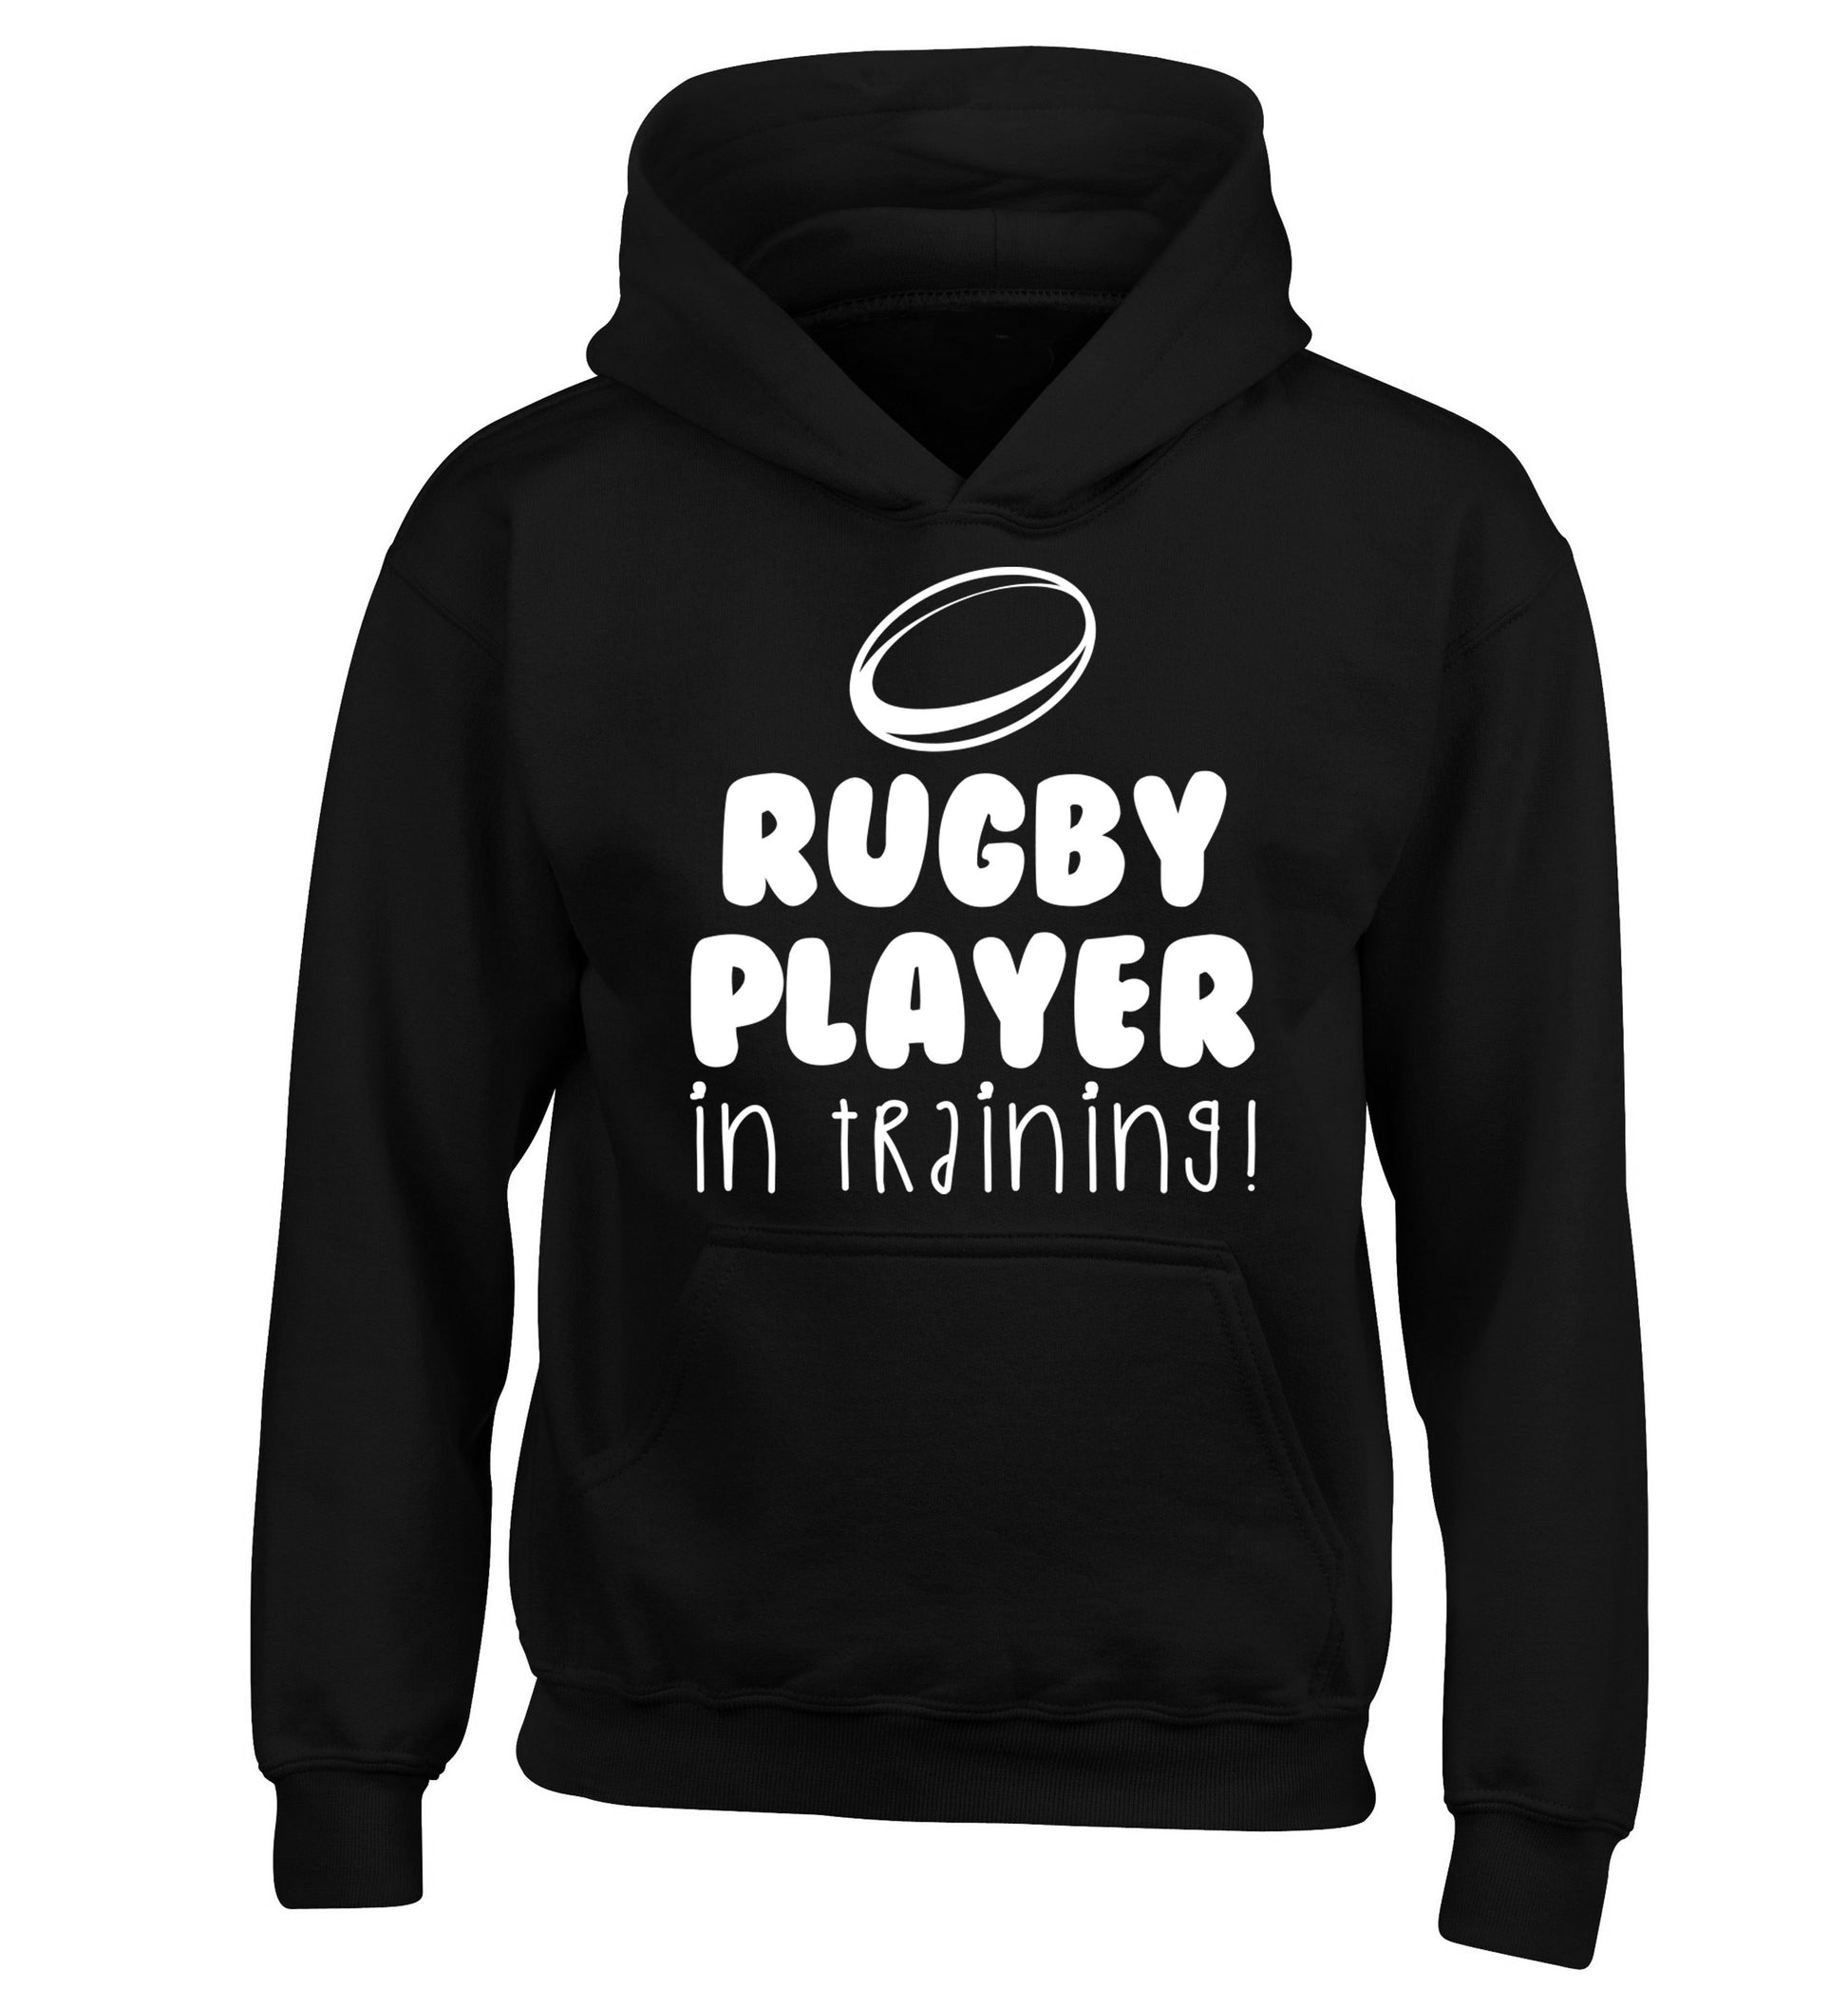 Rugby player in training children's black hoodie 12-14 Years